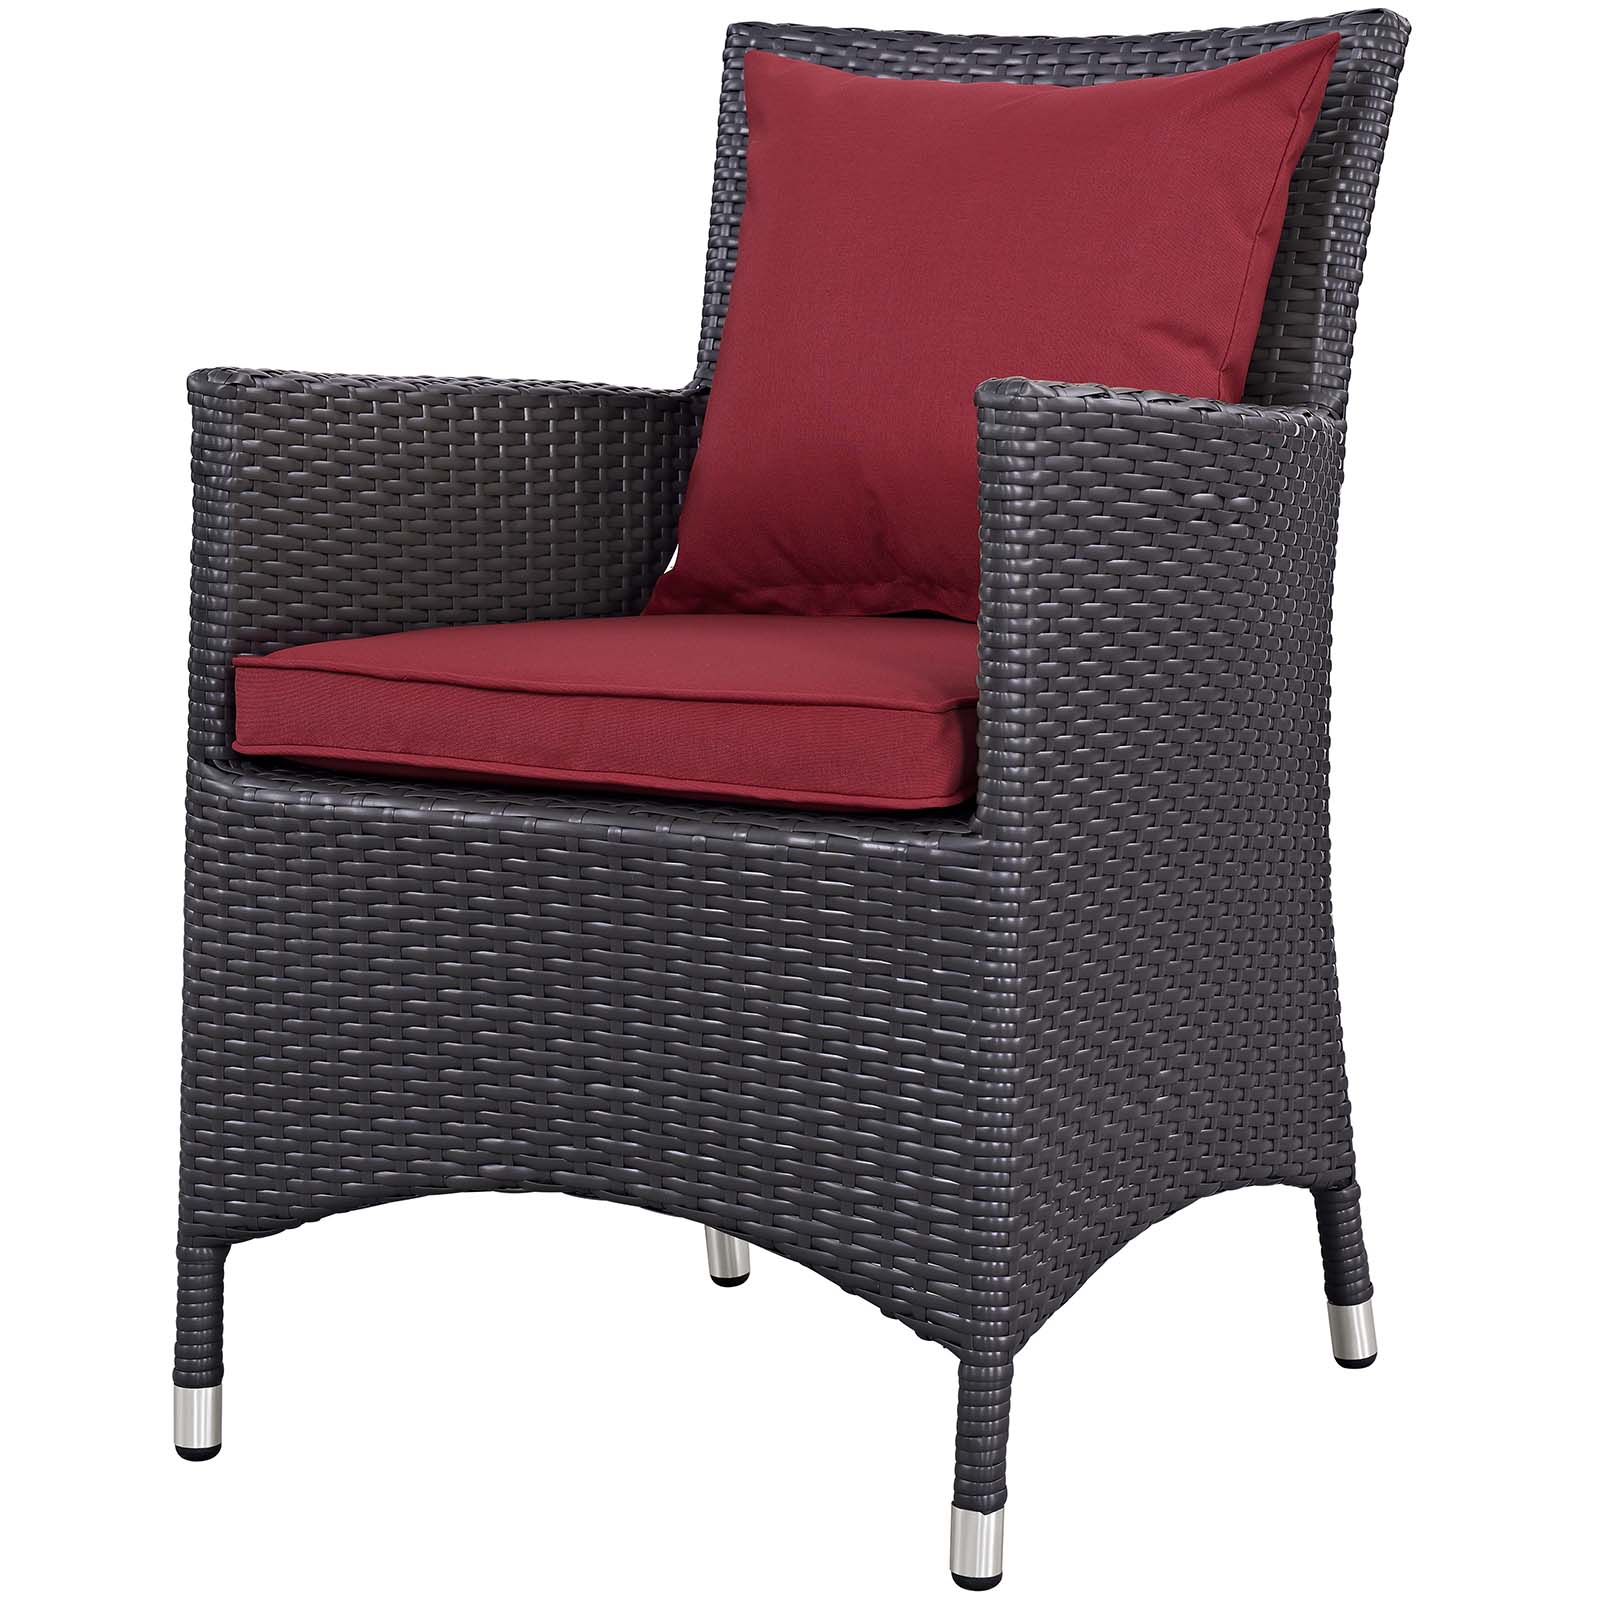 Contemporary Modern Urban Designer Outdoor Patio Balcony Garden Furniture Lounge Coffee Fire Pit Table and Chair Set, Fabric Rattan Wicker, Red - image 4 of 8